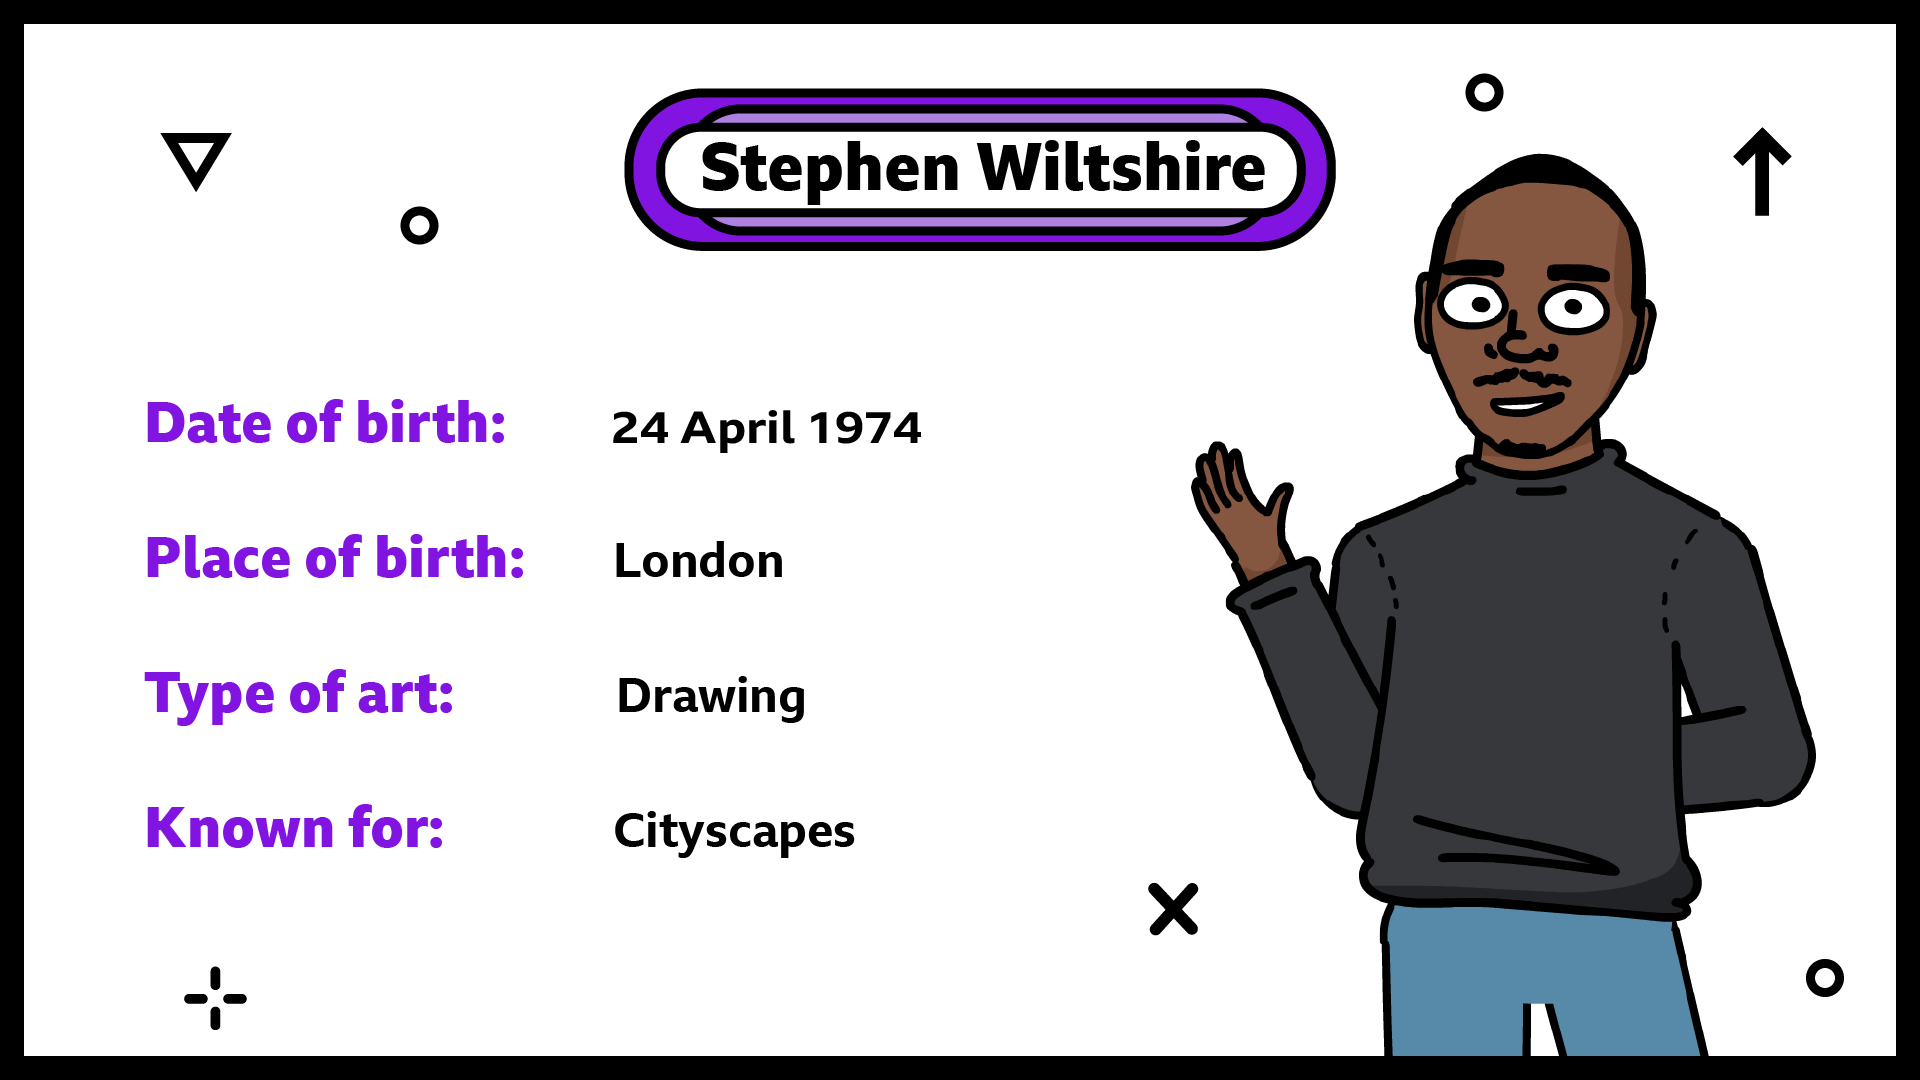 Date of birth 24 April. Place of birth London. Type of art drawing. Known for cityscapes.